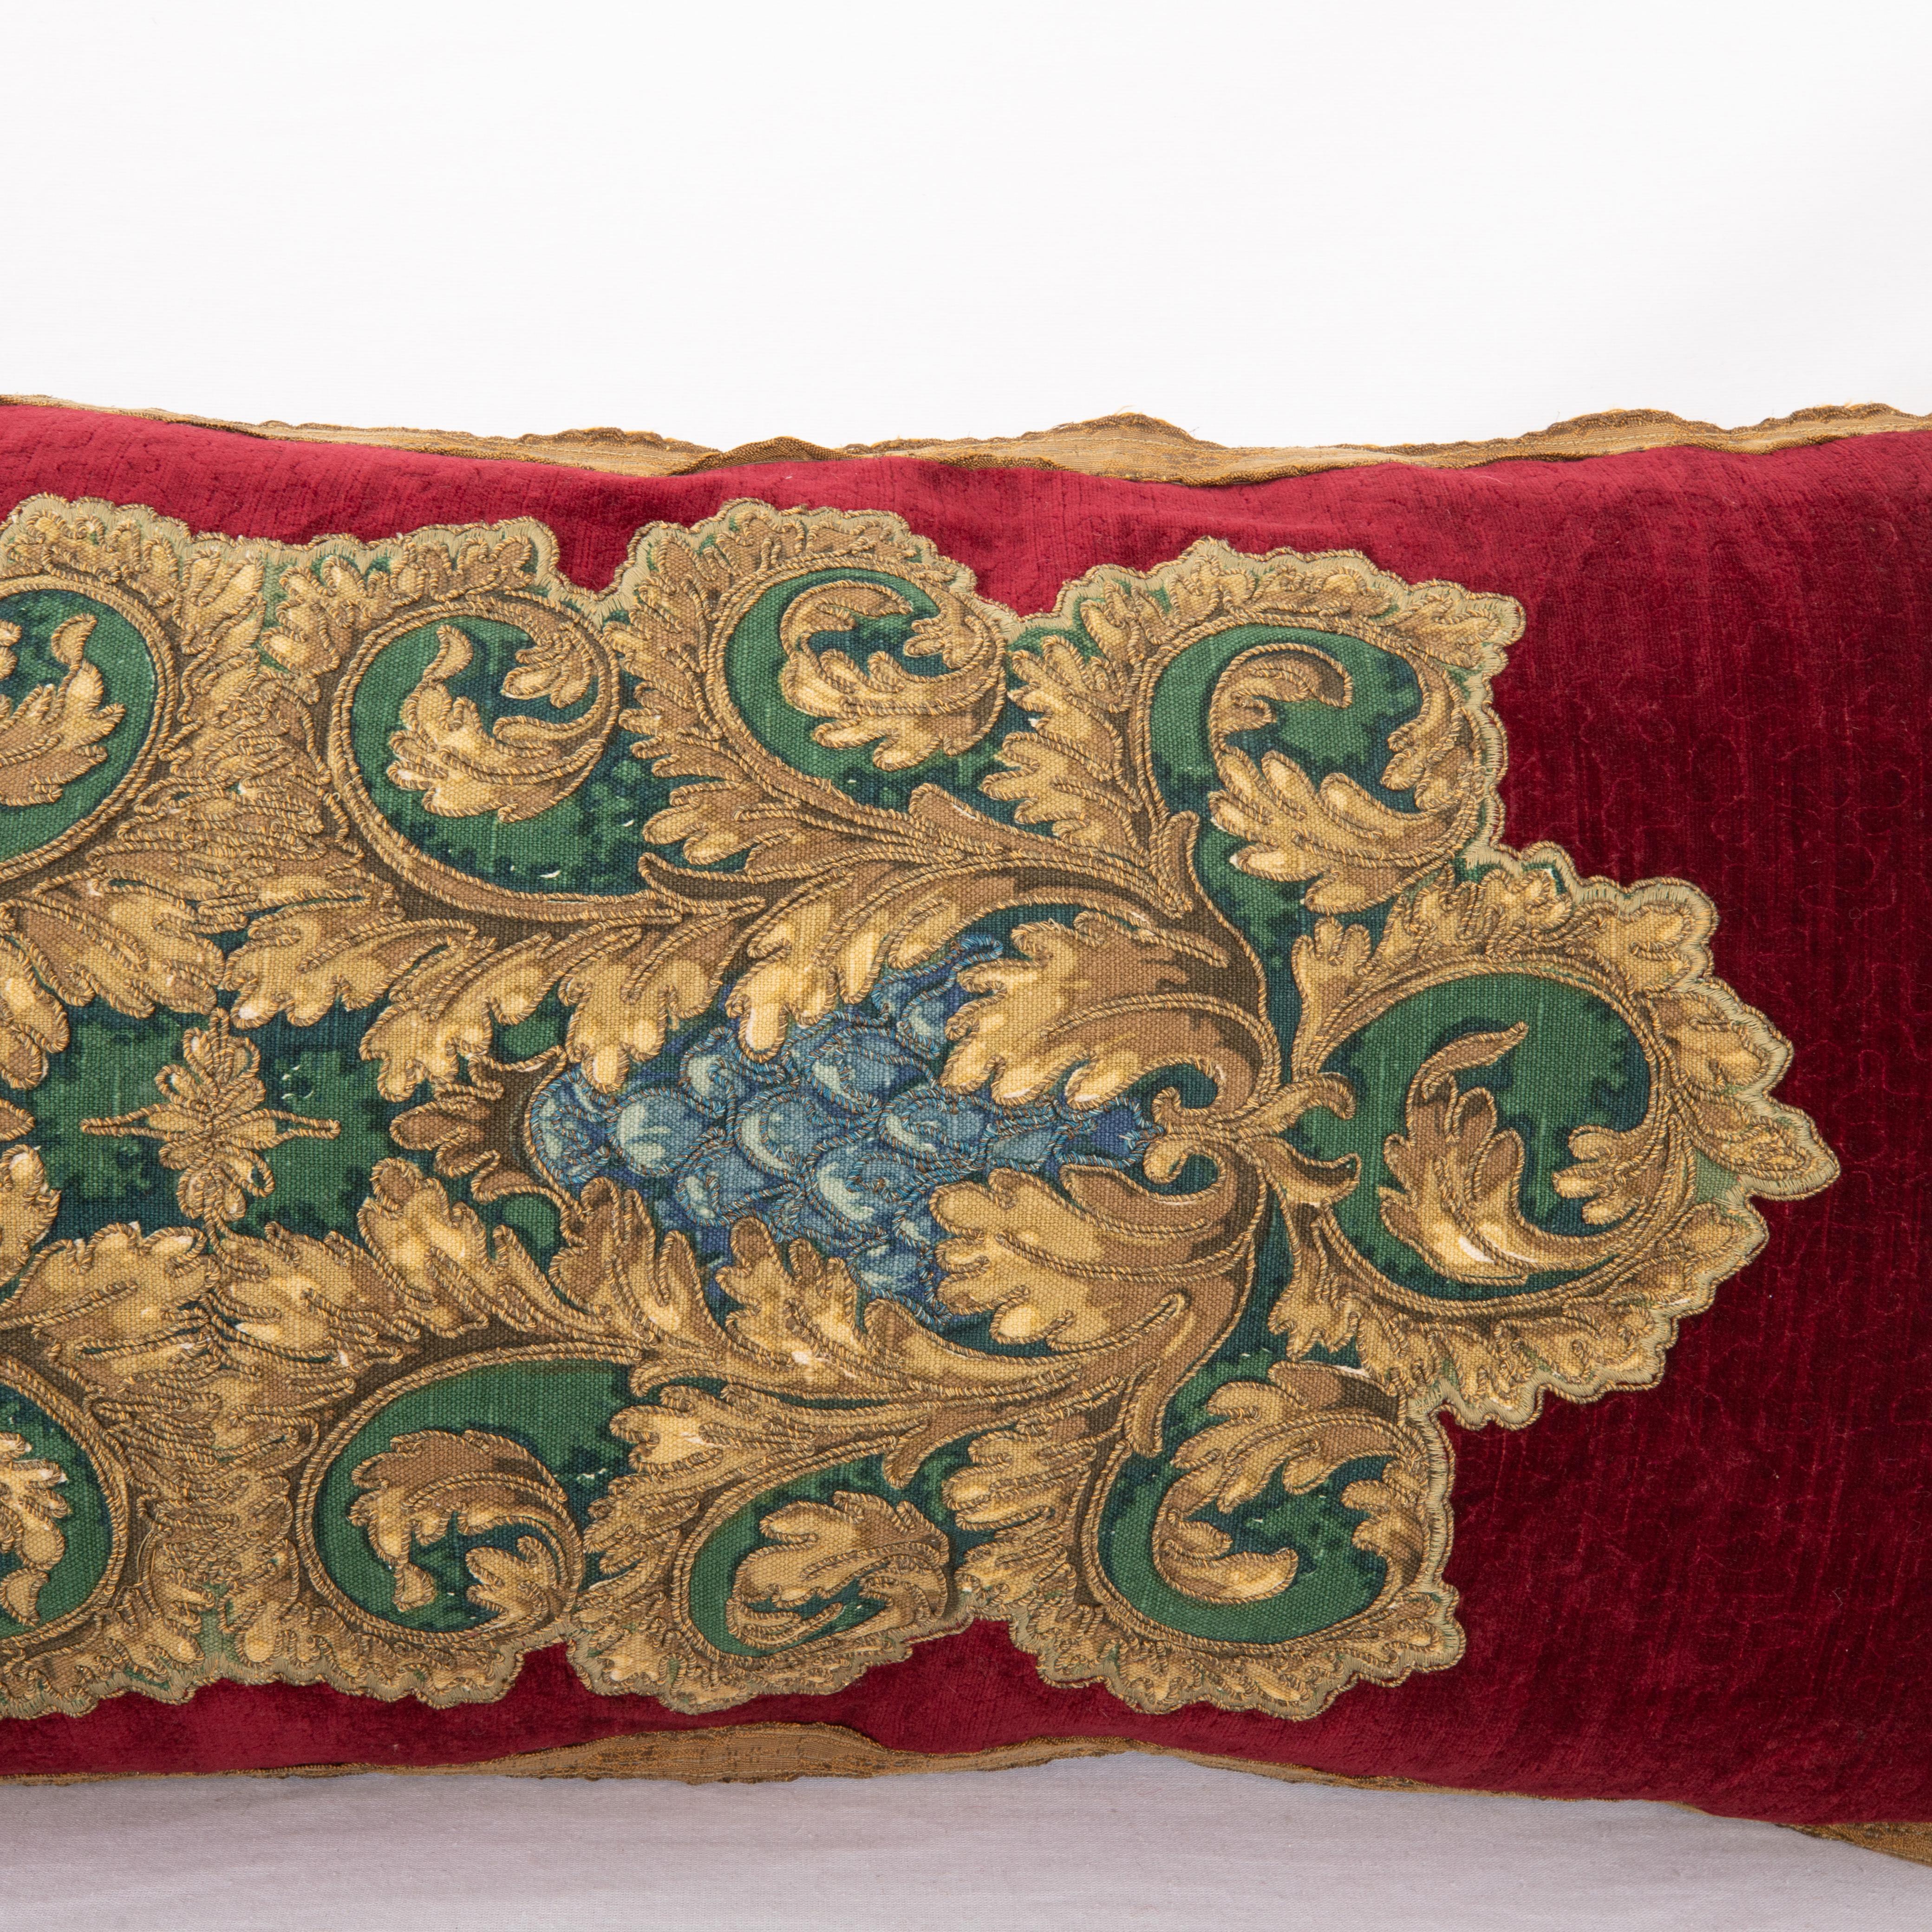 20th Century Pillow Cover Made from an early 20th C. Italian Embroidery For Sale